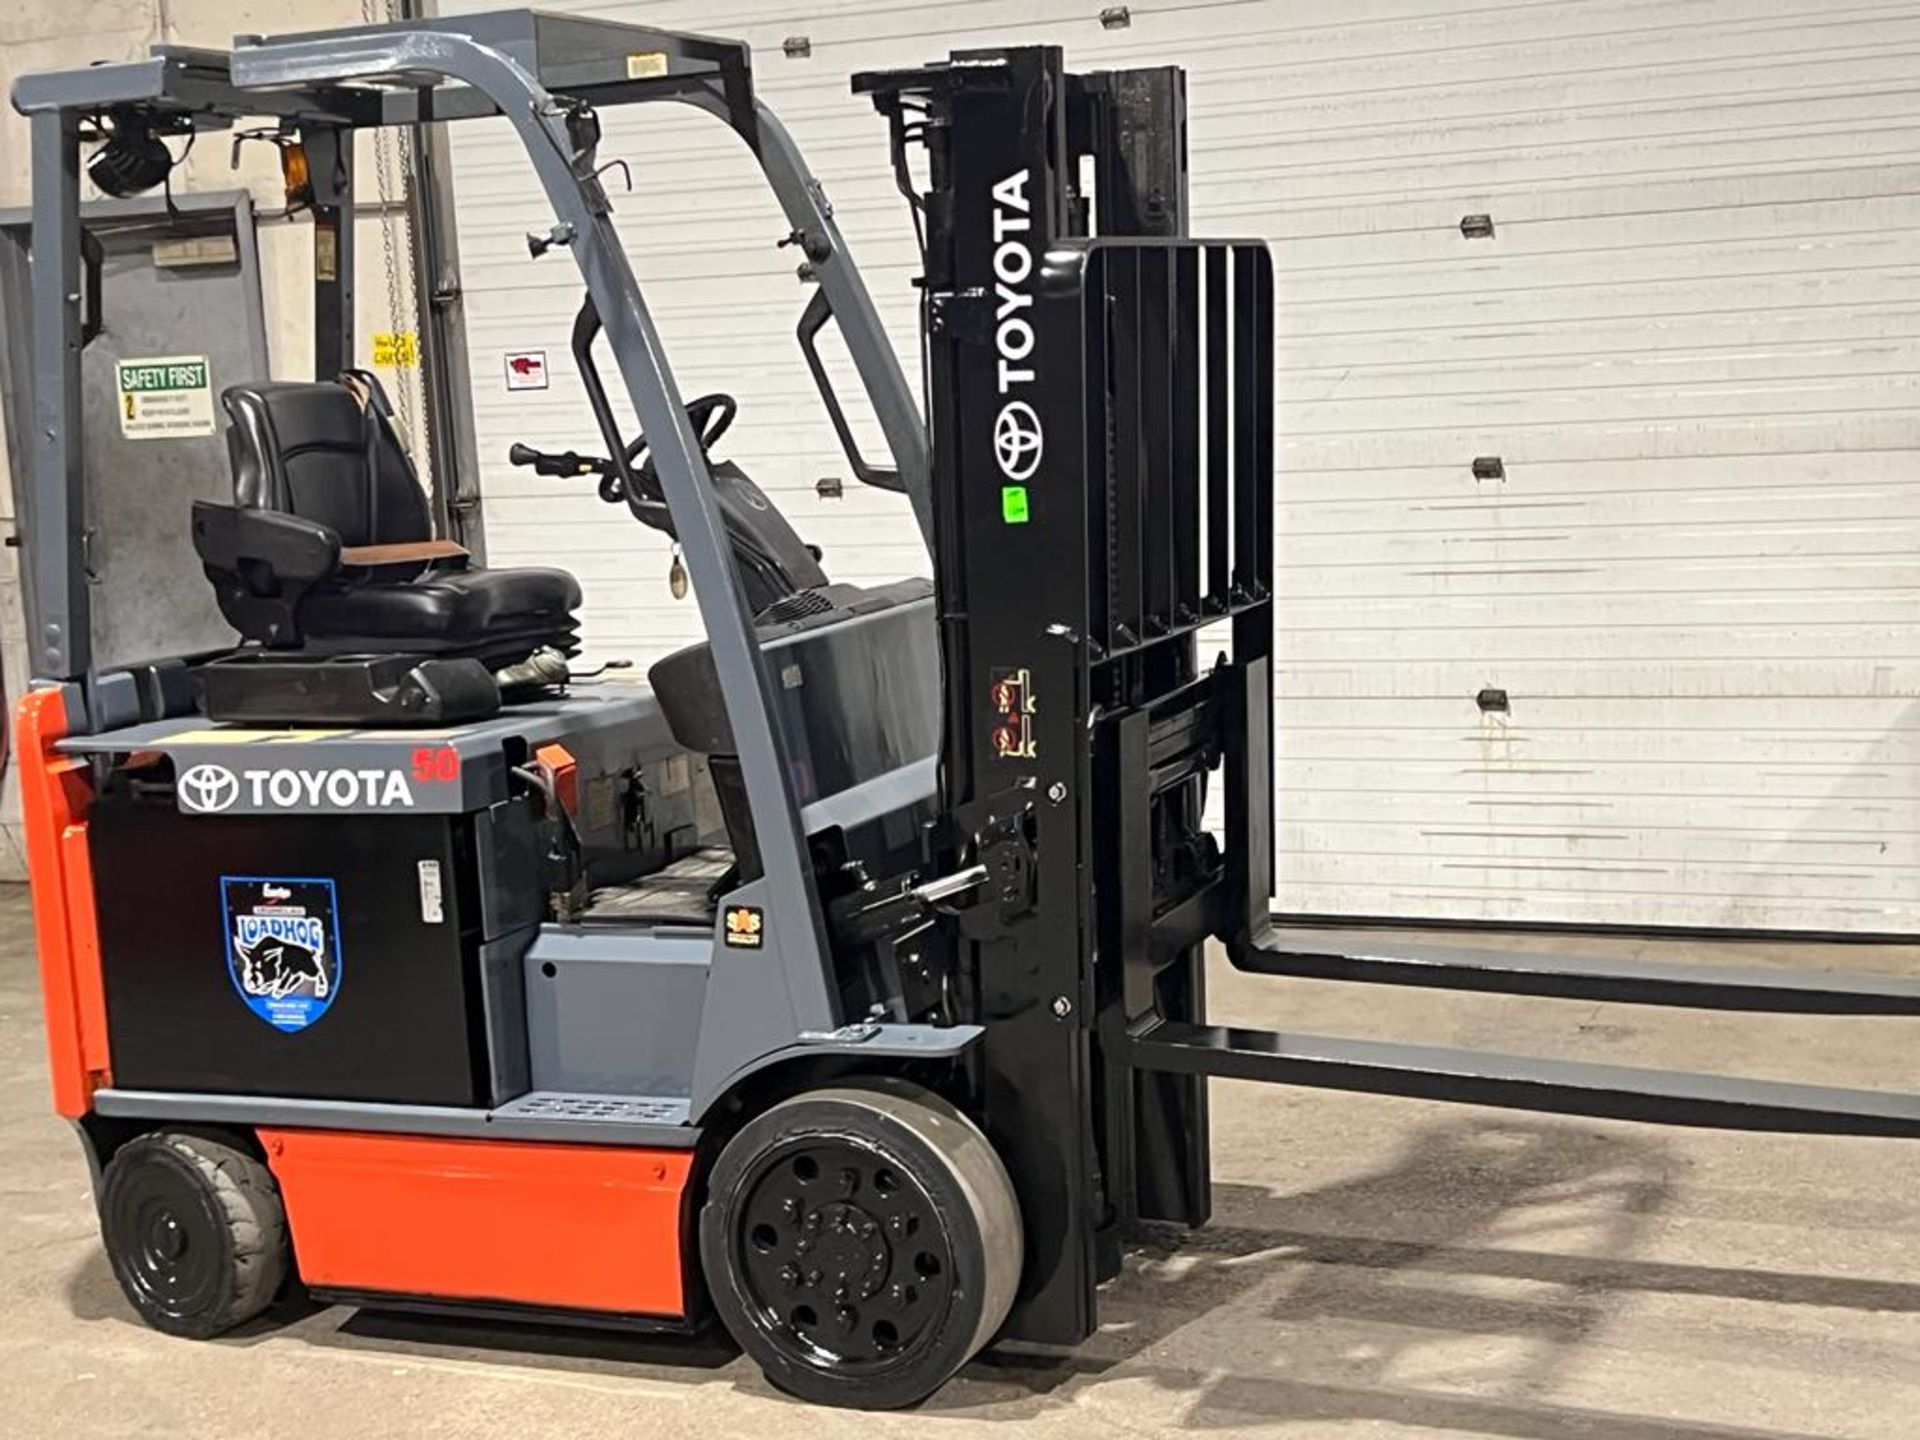 2014 Toyota 5,000lbs Capacity Forklift Electric 48V battery with Sideshift & 60" Forks - FREE